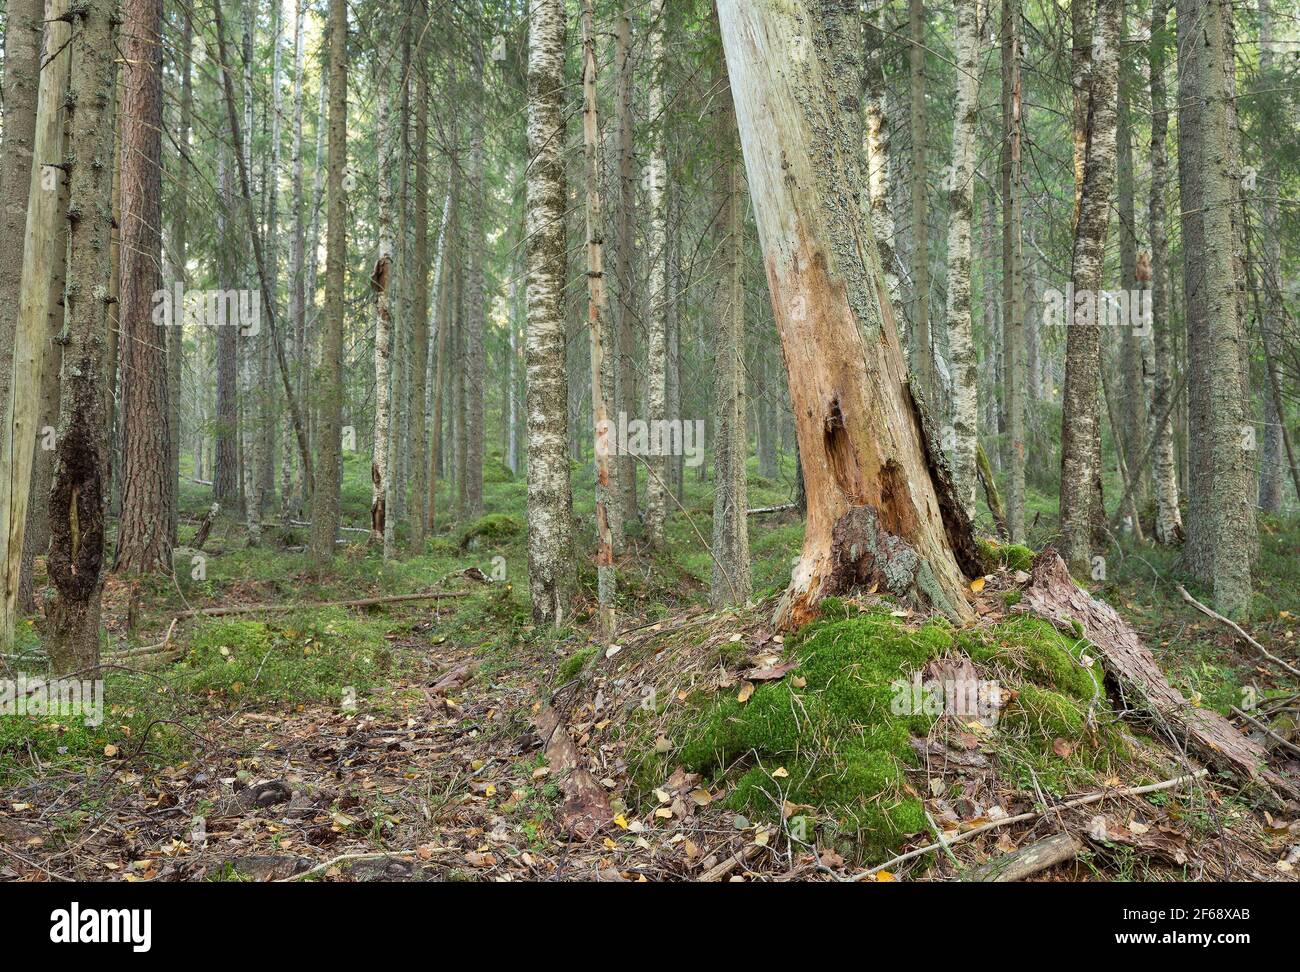 Mixed natural forest in sweden, early autumn Stock Photo